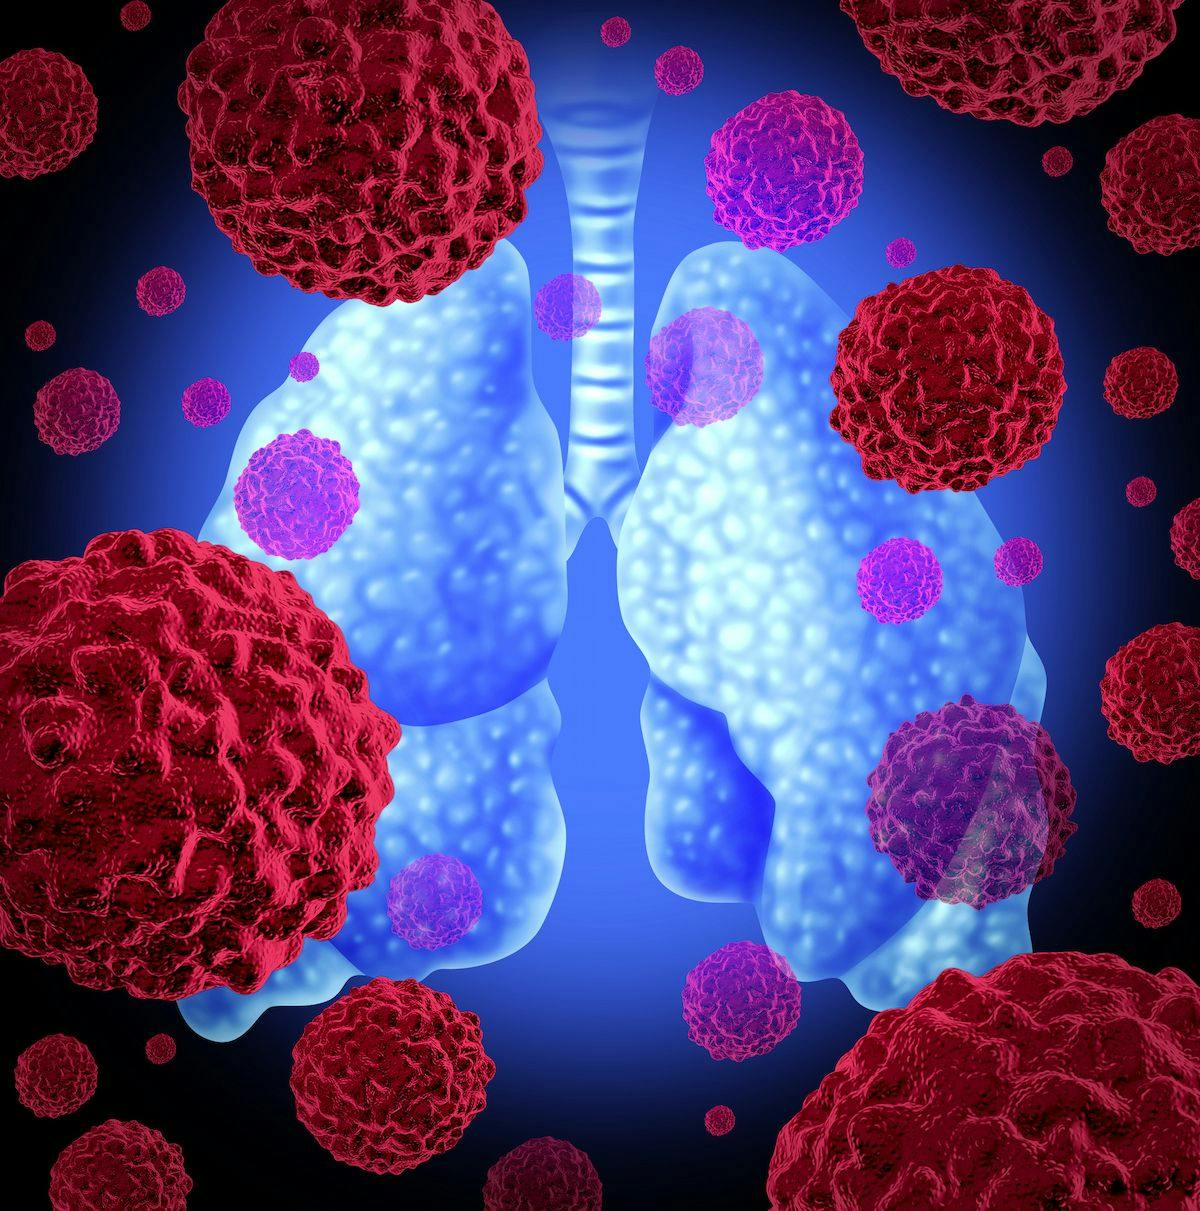 The regulatory agency has cleared developers to continue patient enrollment in the phase 2 IOV-LUN-202 trial evaluating LN-145 in non–small cell lung cancer.